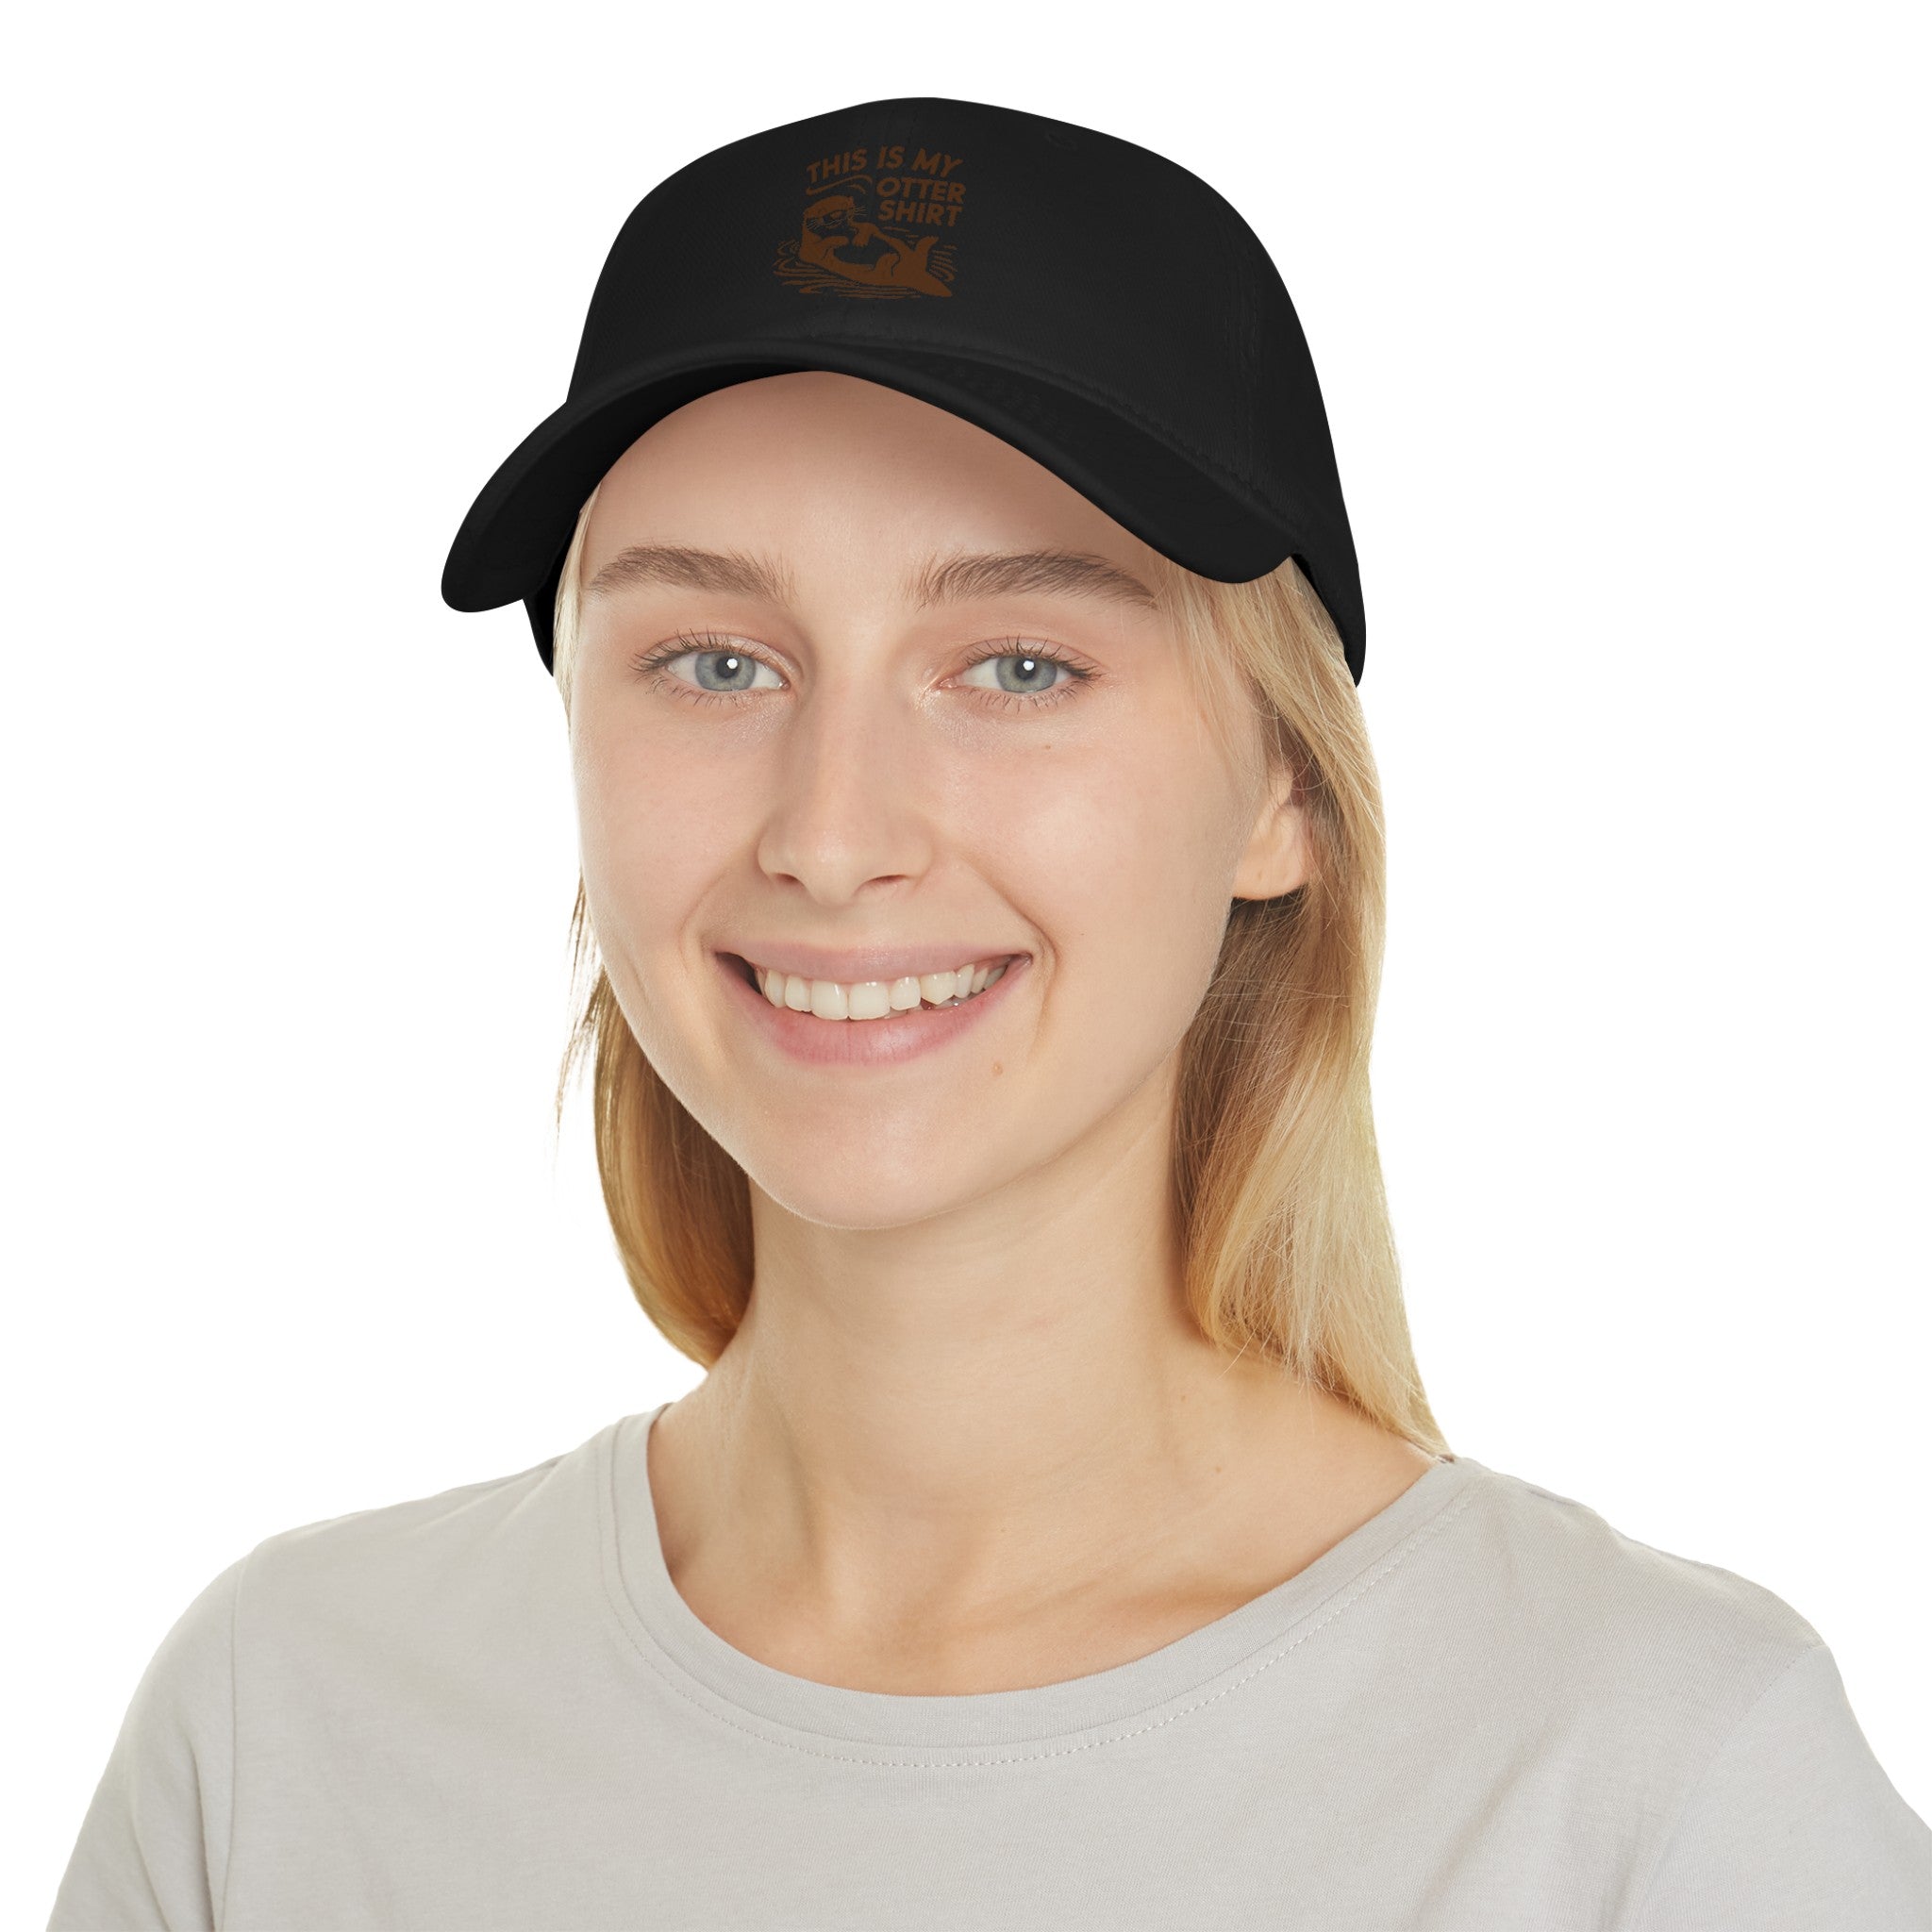 A person with long blonde hair is wearing a black My Otter Shirt - Hat that effortlessly combines unique style and exceptional comfort. The light gray T-shirt complements the look, and the hat features text and a design on the front. Smiling, the person is facing the camera.